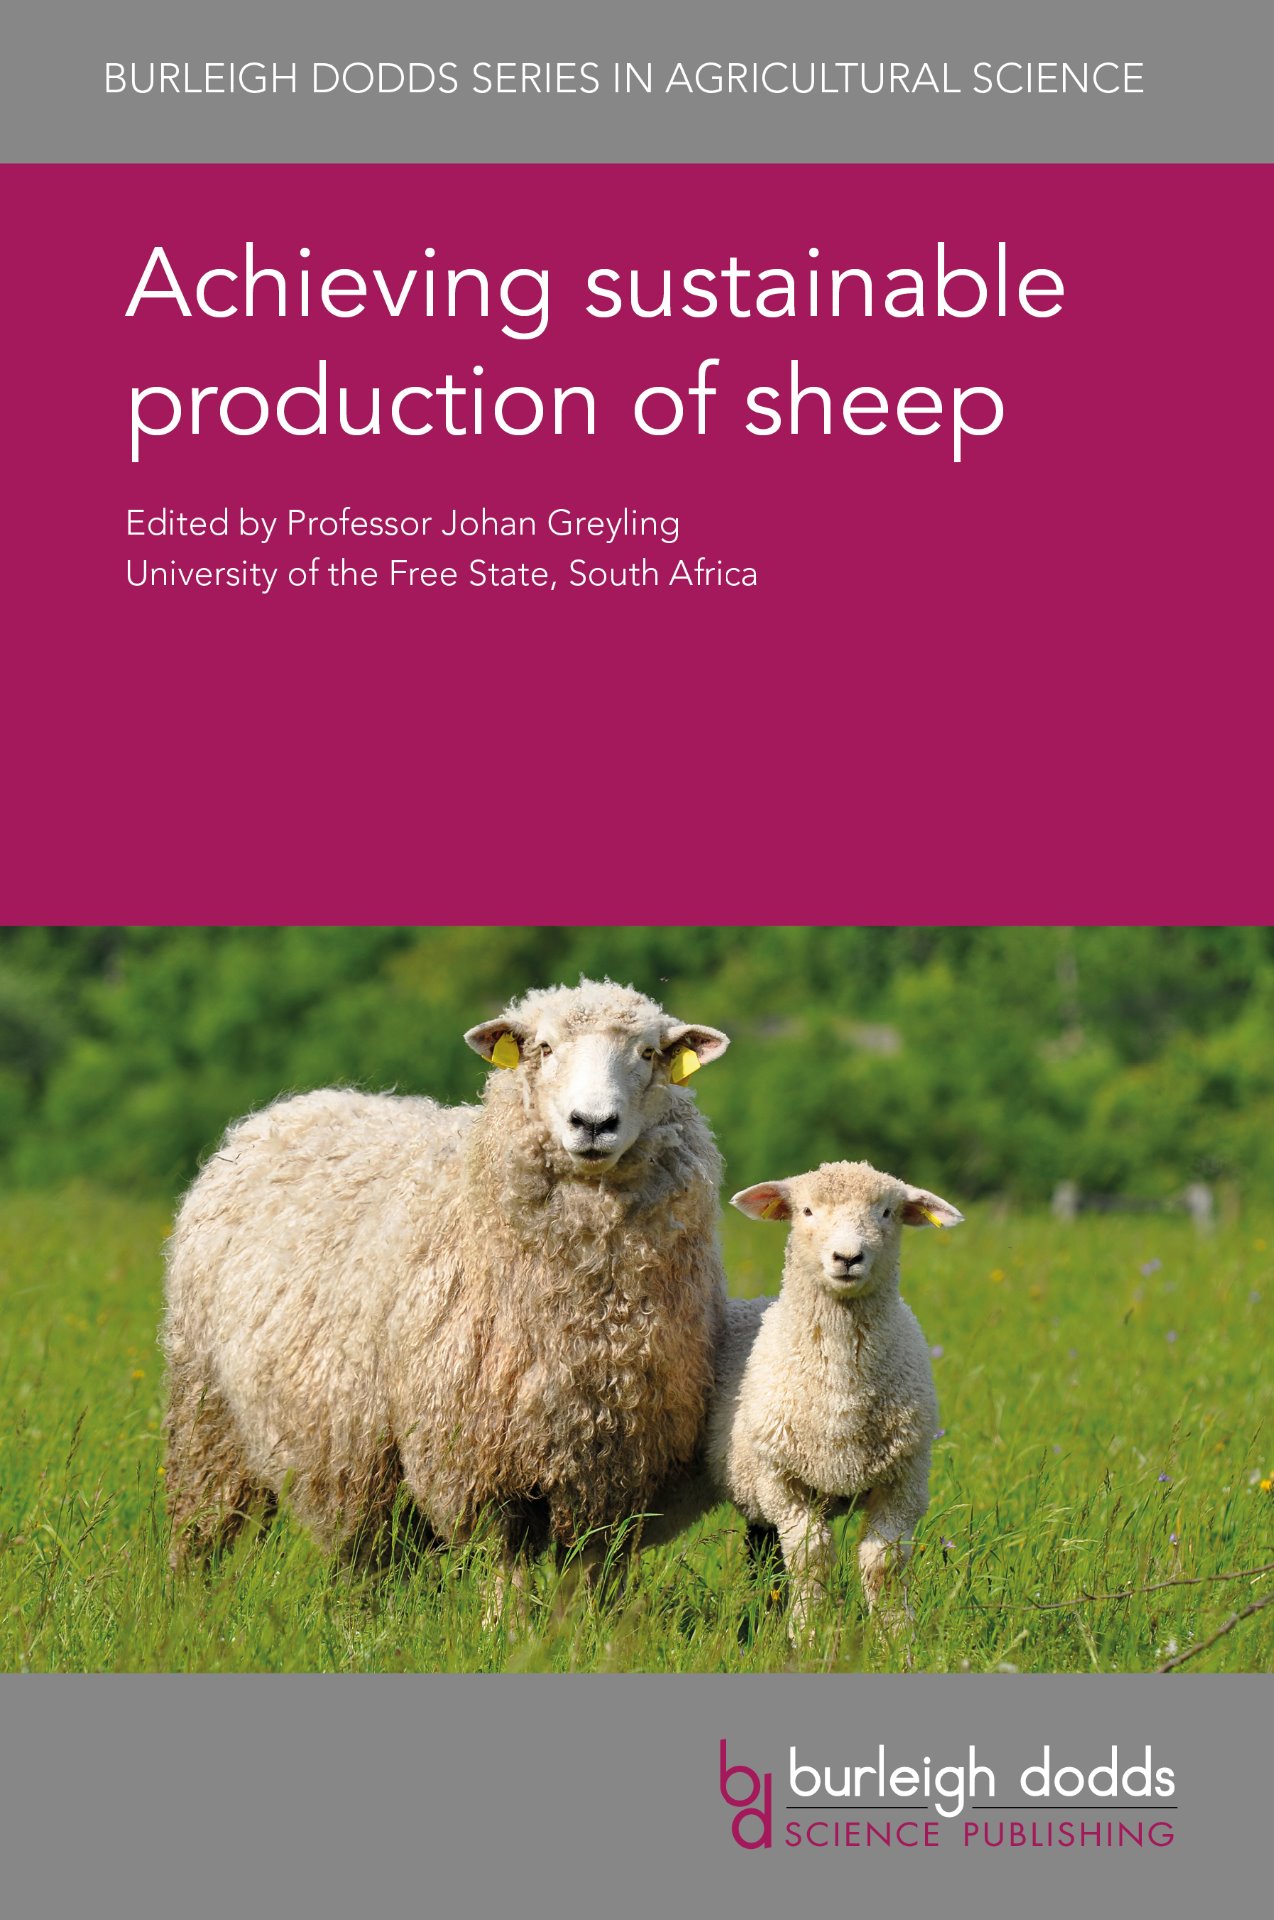 Achieving sustainable production of sheep